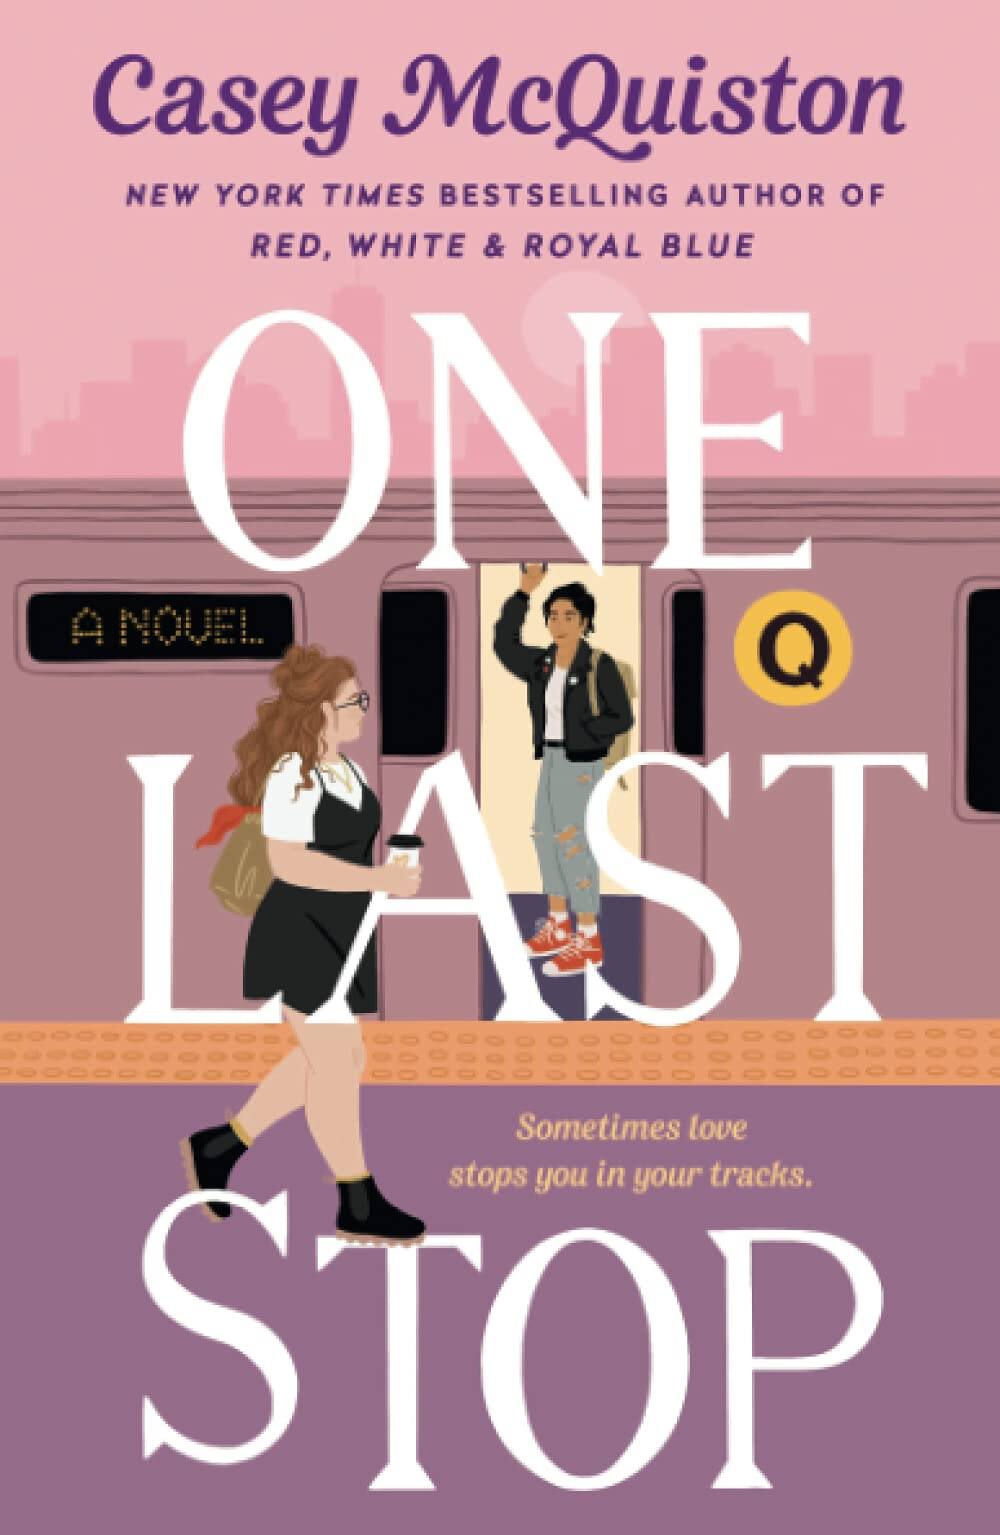 “One More Stop,” by Casey McQuiston, is the No. 3 bestselling book in Petaluma this week. (GRIFFIN BOOKS)